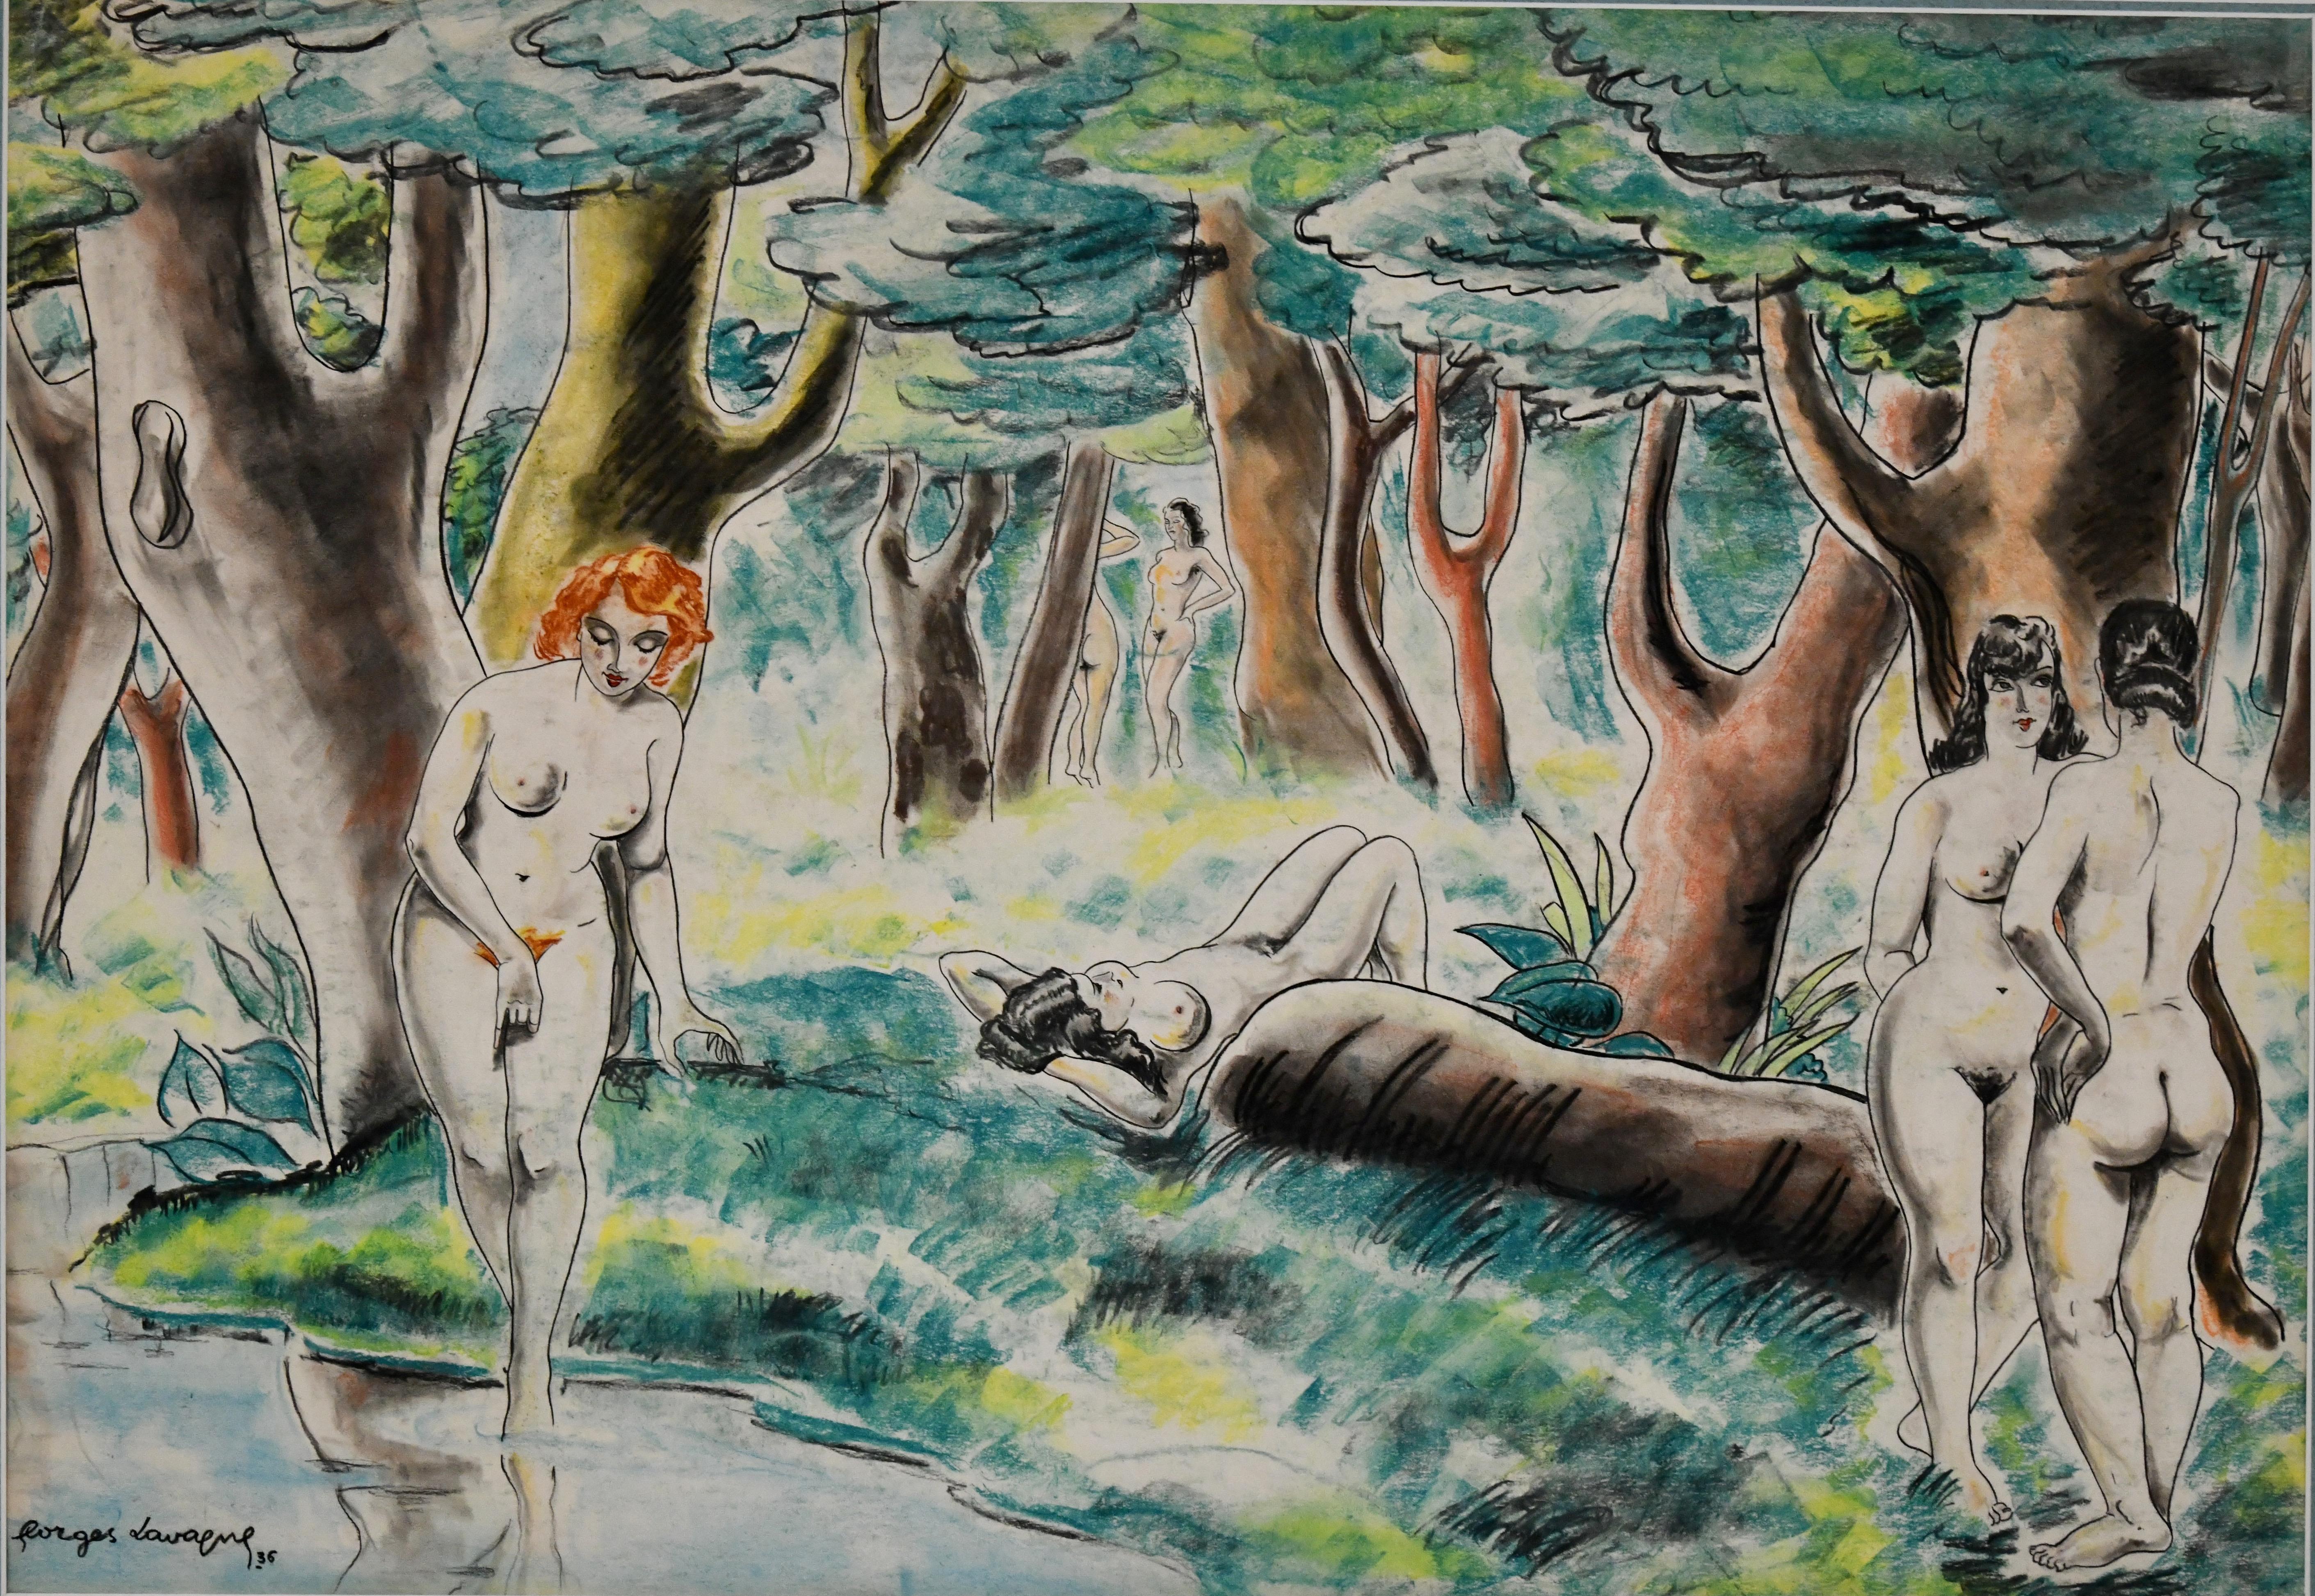 Art Deco pastel painting nudes in a landscape by Georges Lavergne. 
Signed and dated 1936. Ink, crayon and pastel on paper.
France. 
Contemporary frame. 
Size:
H. 68 cm. x L. 89.5  cm. x 2 cm. 
H. 26.8 inch x L. 35.2 inch x W. 0.8 inch. 
Size of the